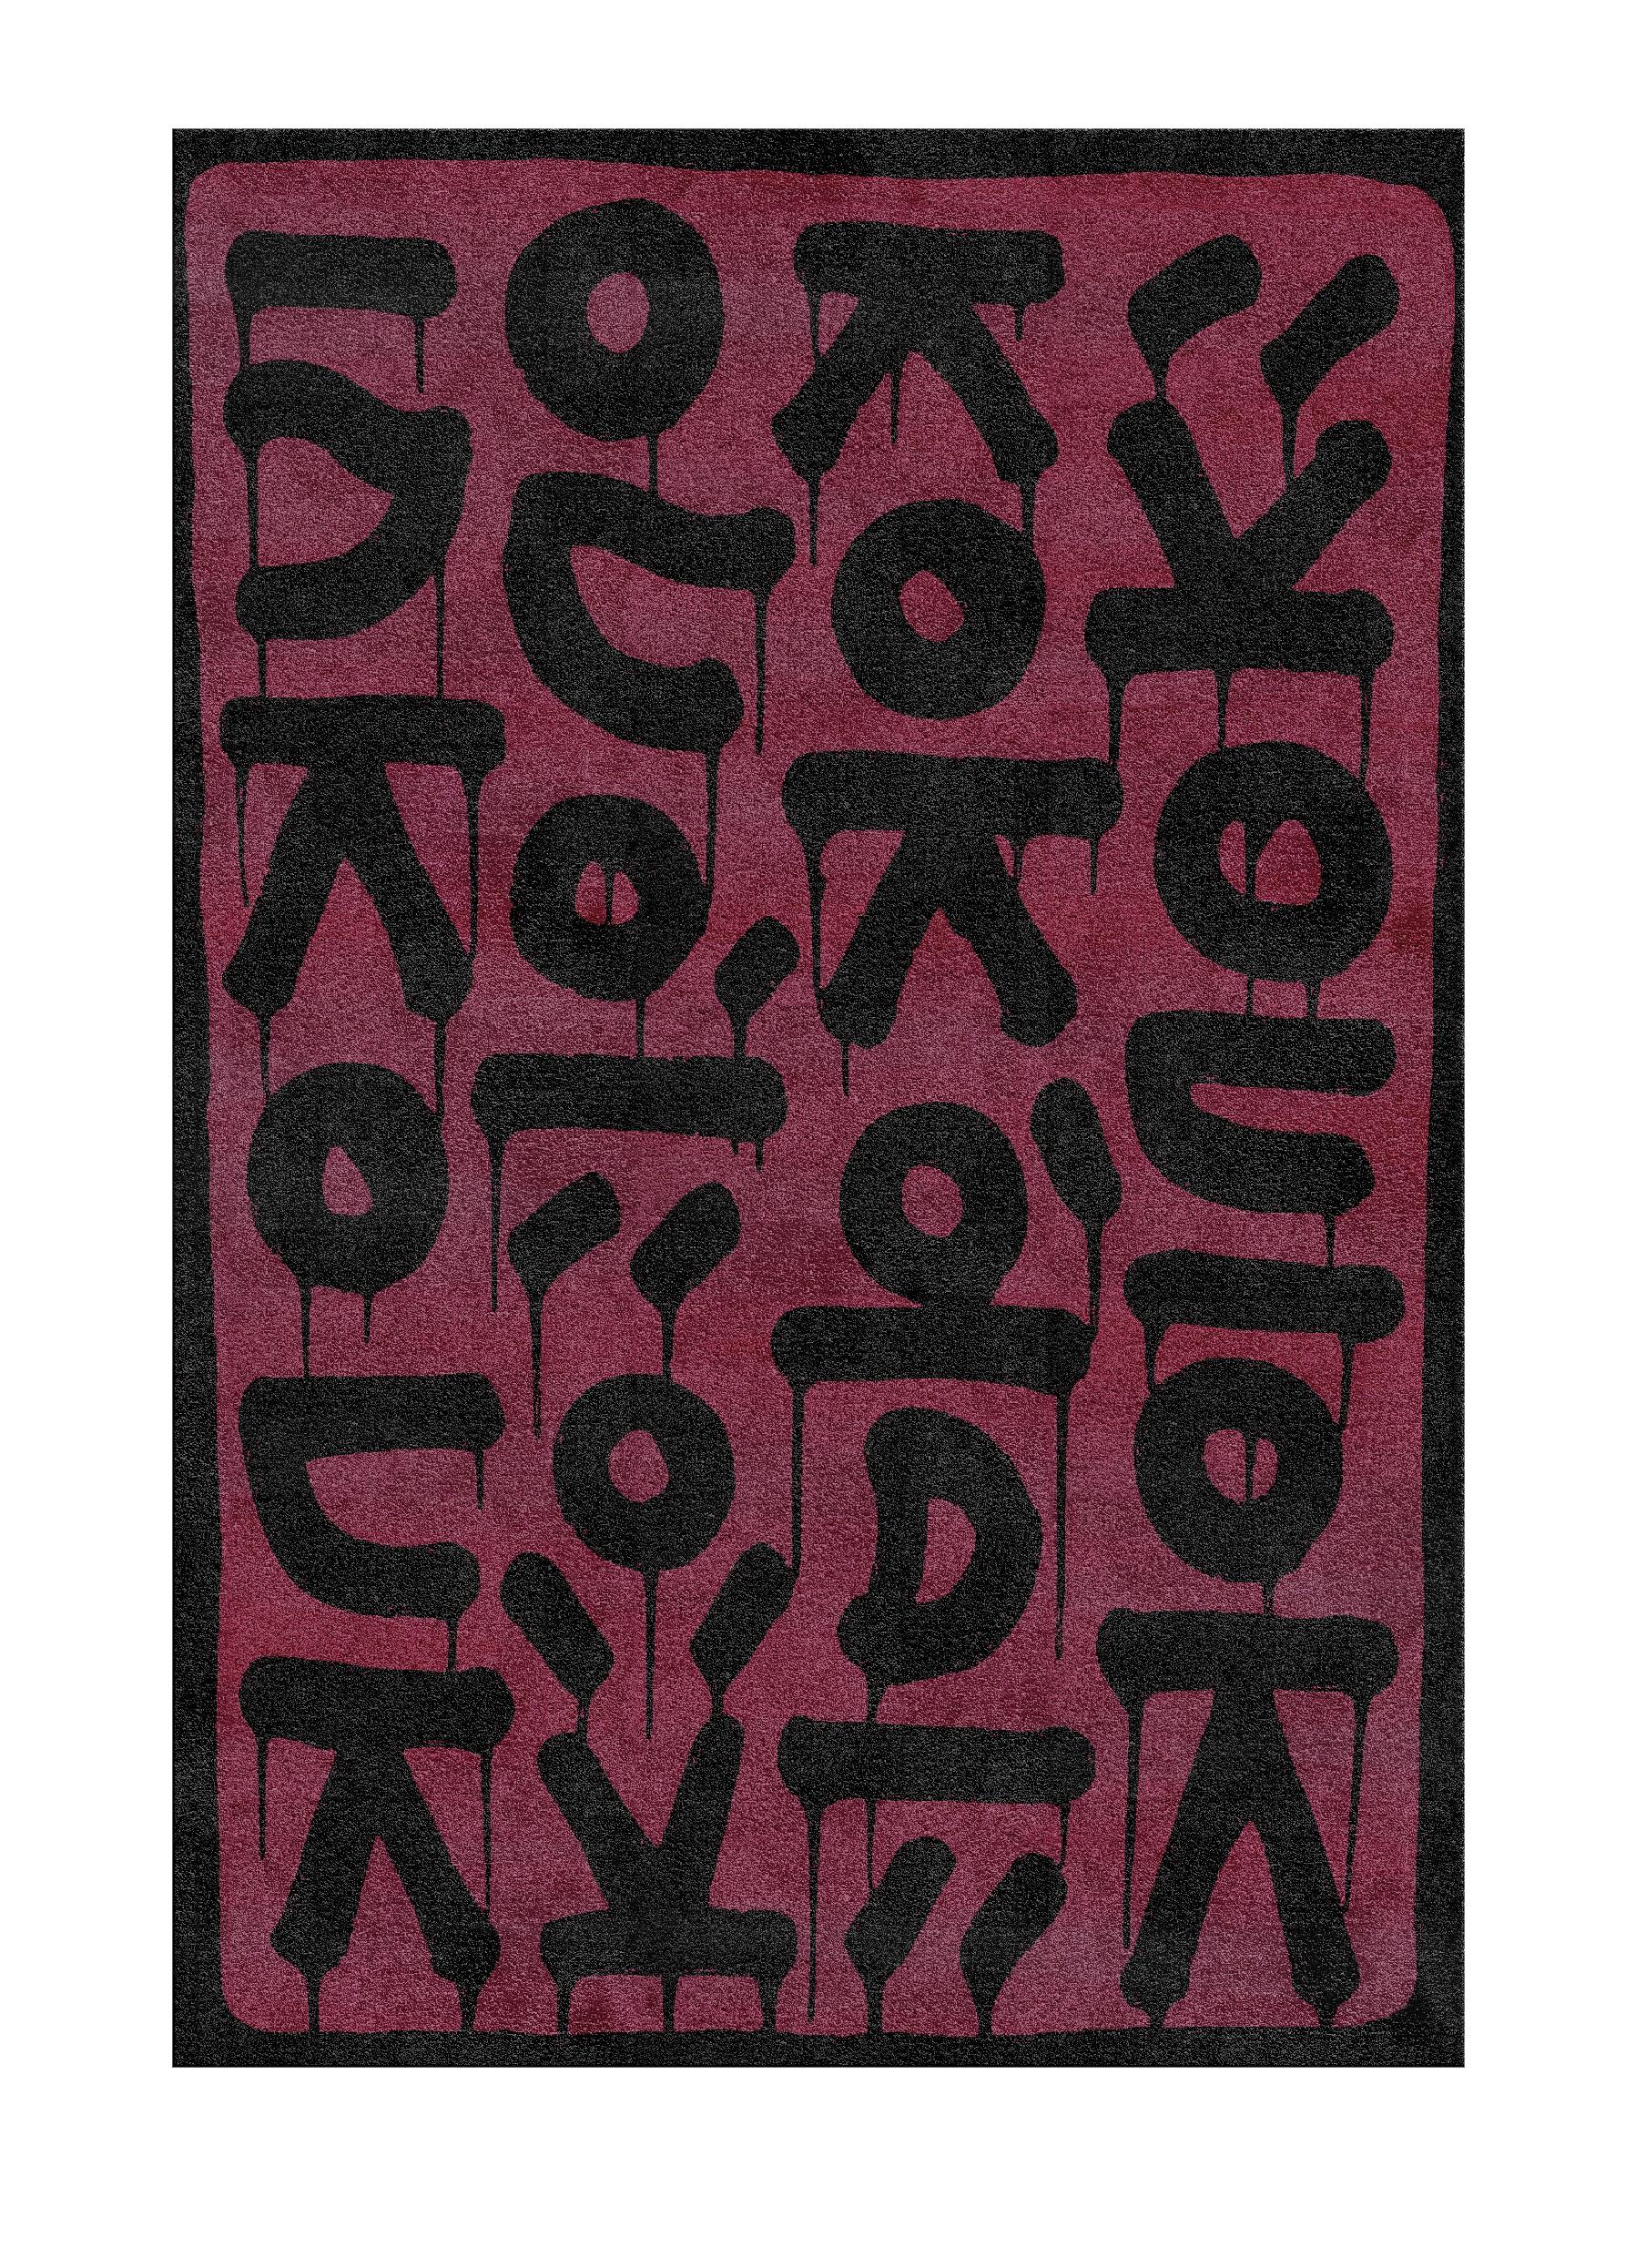 Letter rug II by Raul.
Dimensions: D 300 x W 200 cm.
Materials: Viscose, linen.
Available in other colors.

The ‘Letter’ rug comes from a series entitled “Nomadic signs” representing all the signs and symbols encountered by the artist during